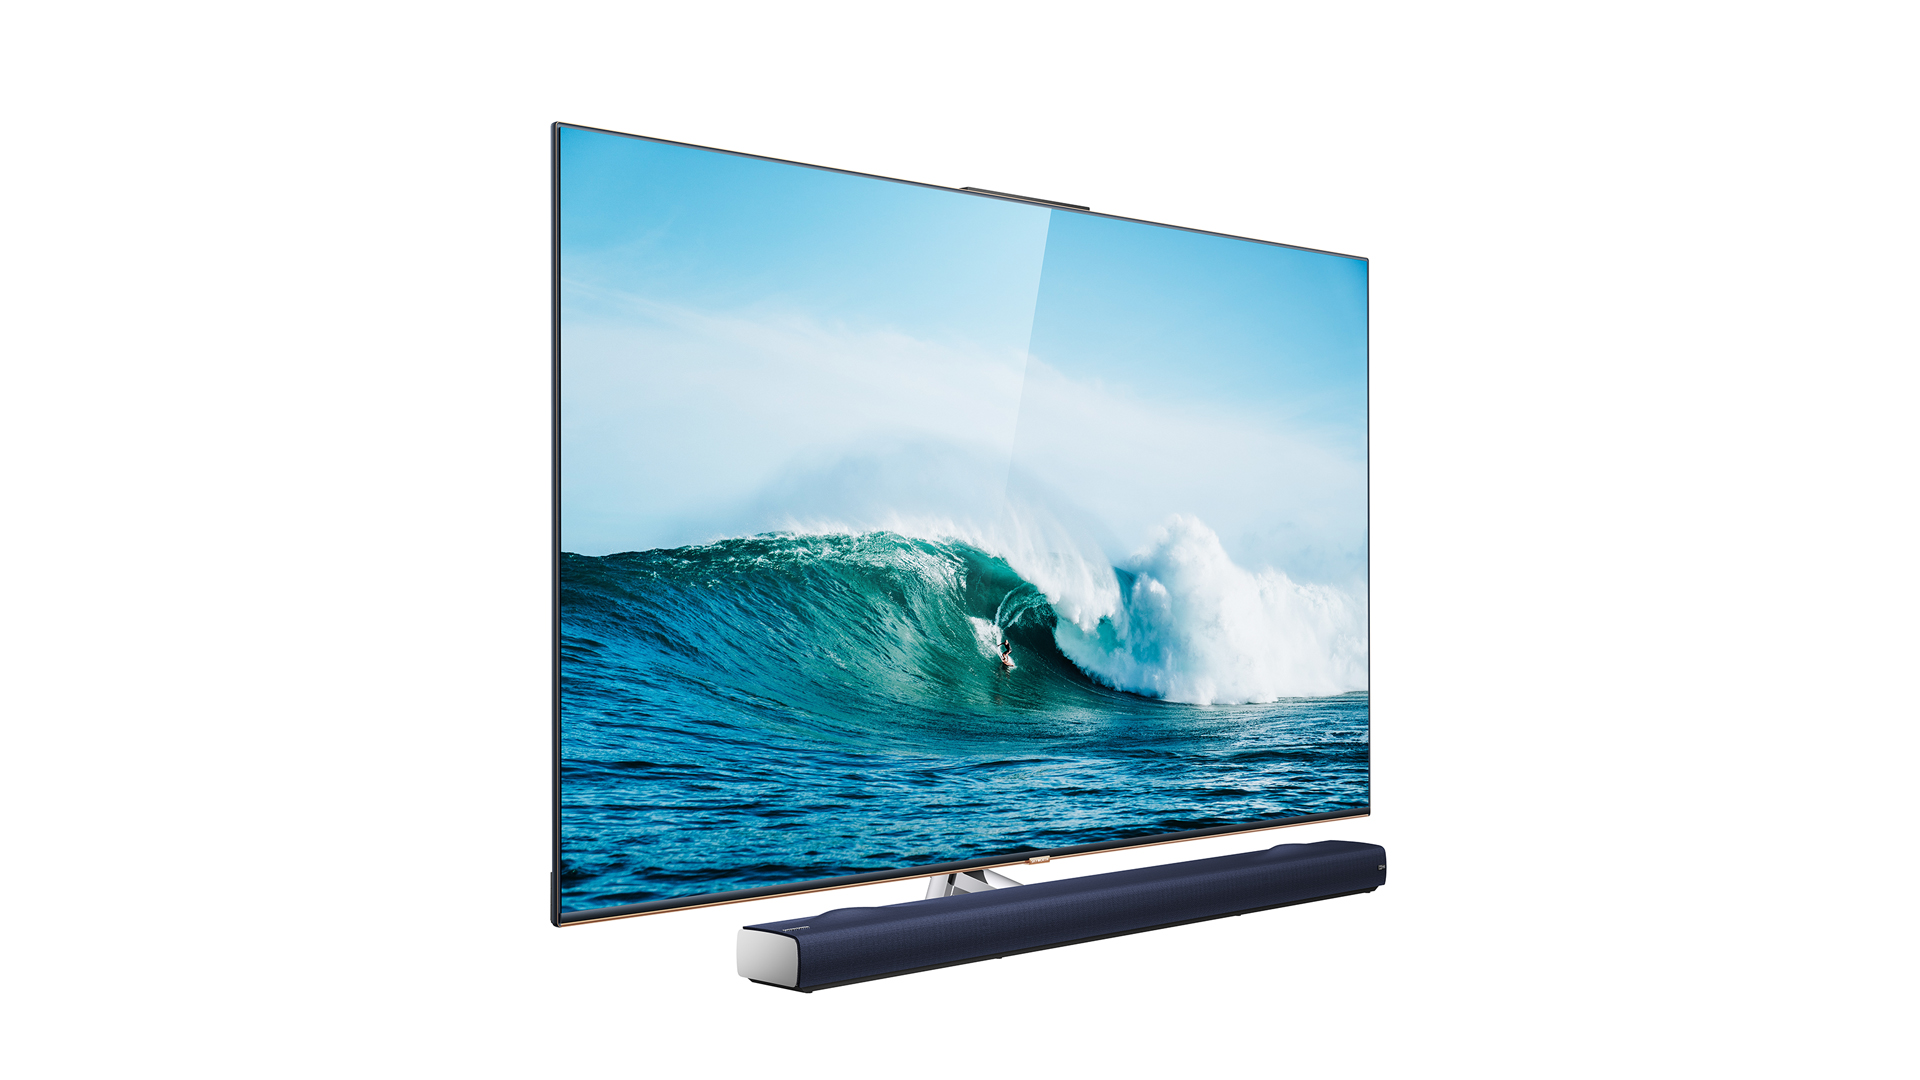 Stock image of Q91 8K TV from SKYWORTH on white background